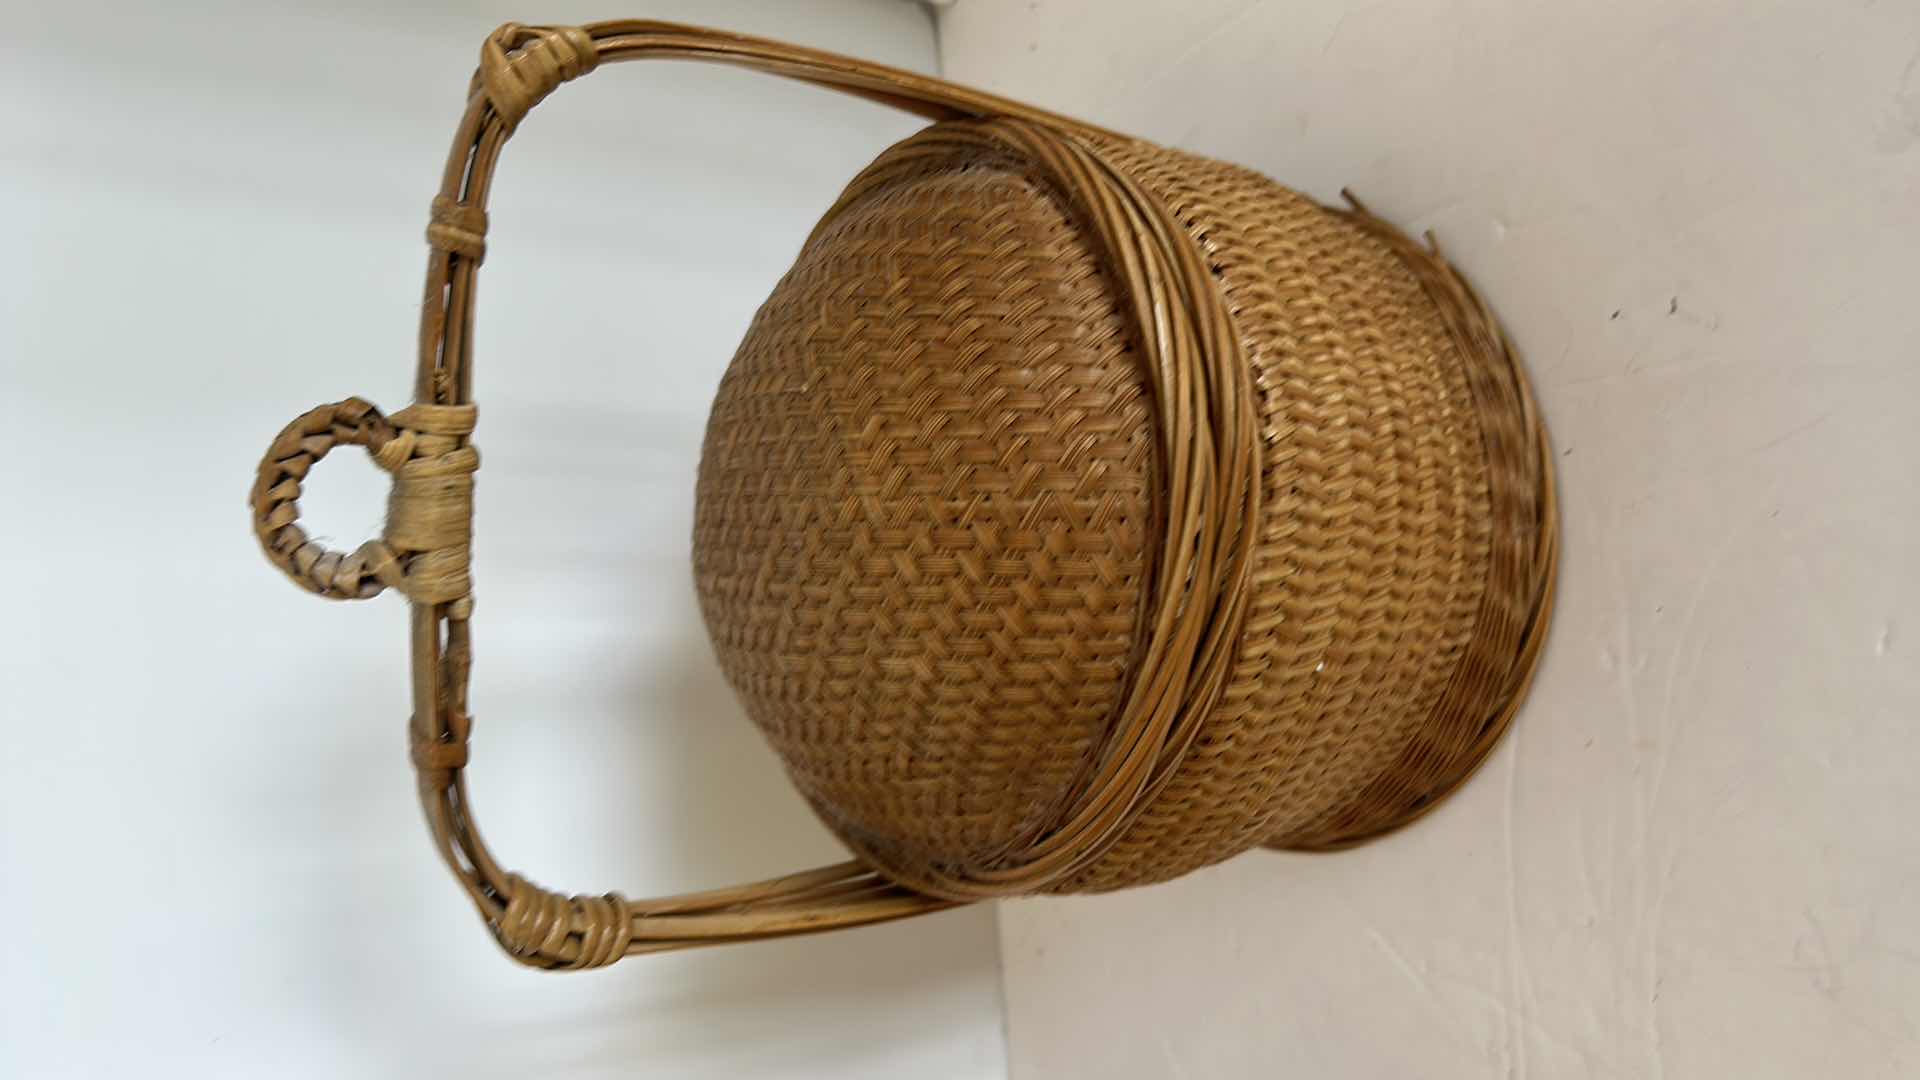 Photo 8 of 3 - CHINESE WICKER VEGTABLE STEAMING BASKETS.  LARGEST 10 1/2” x 7”